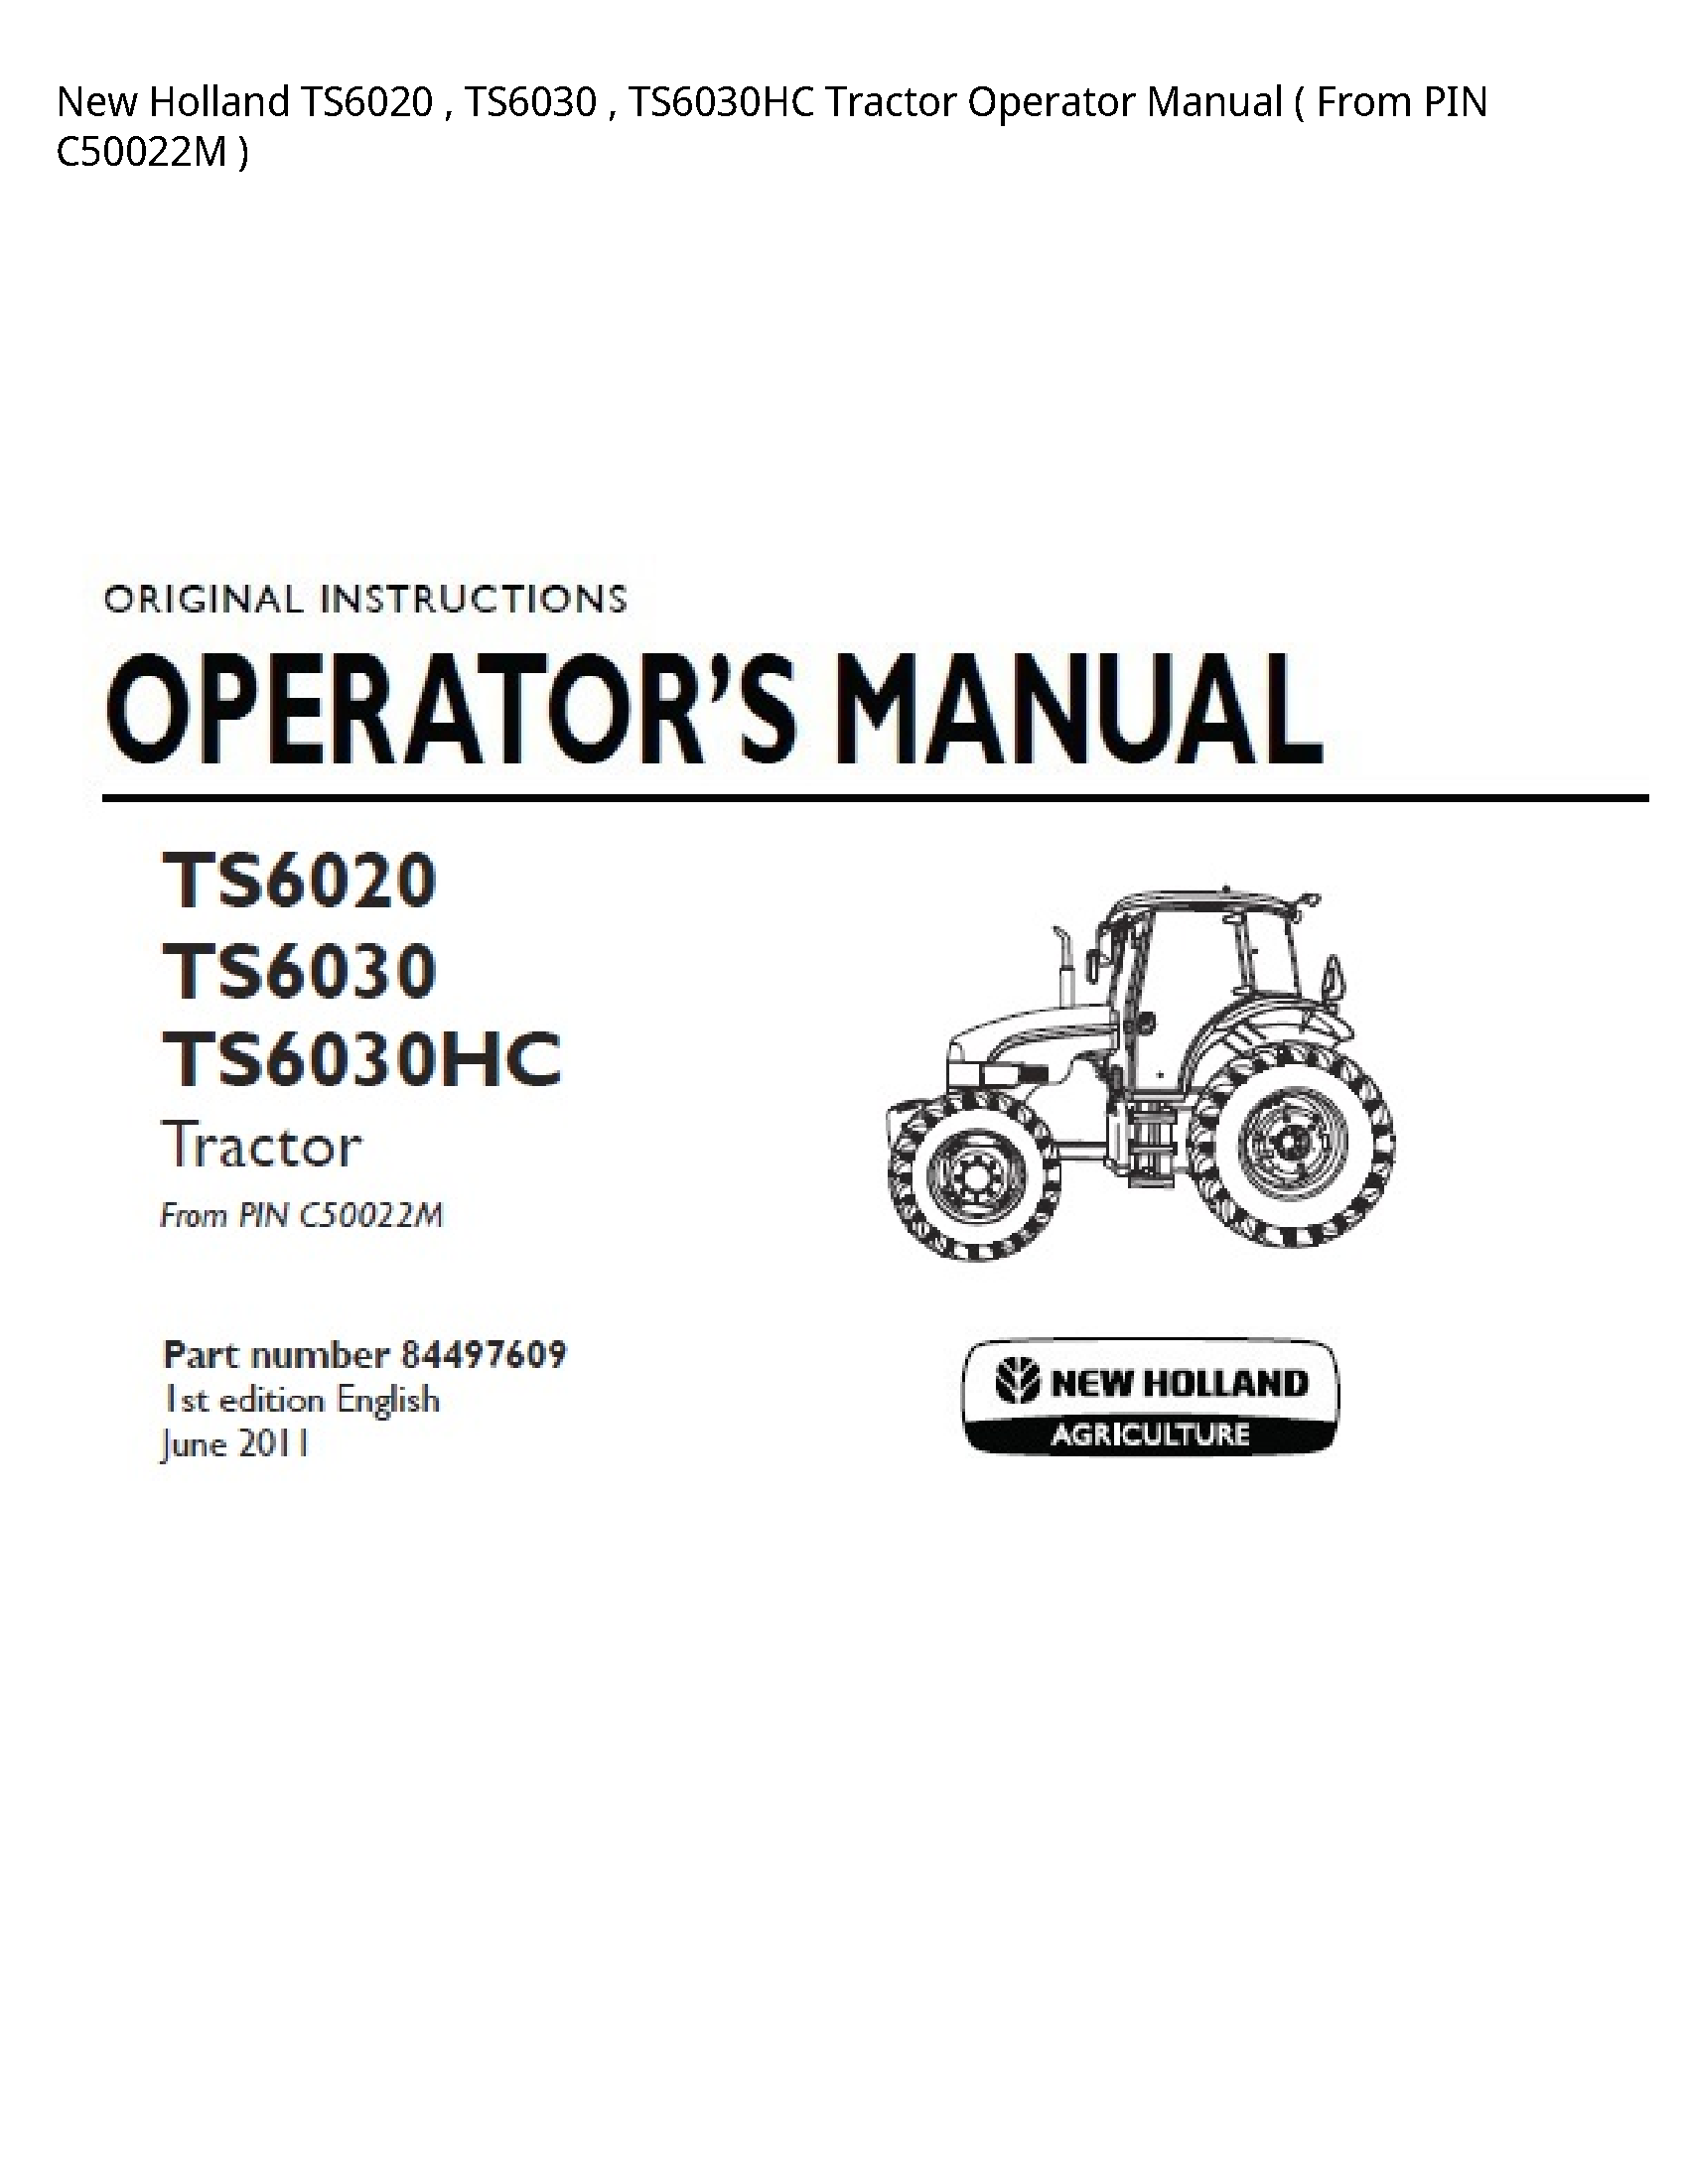 New Holland TS6020 Tractor Operator manual